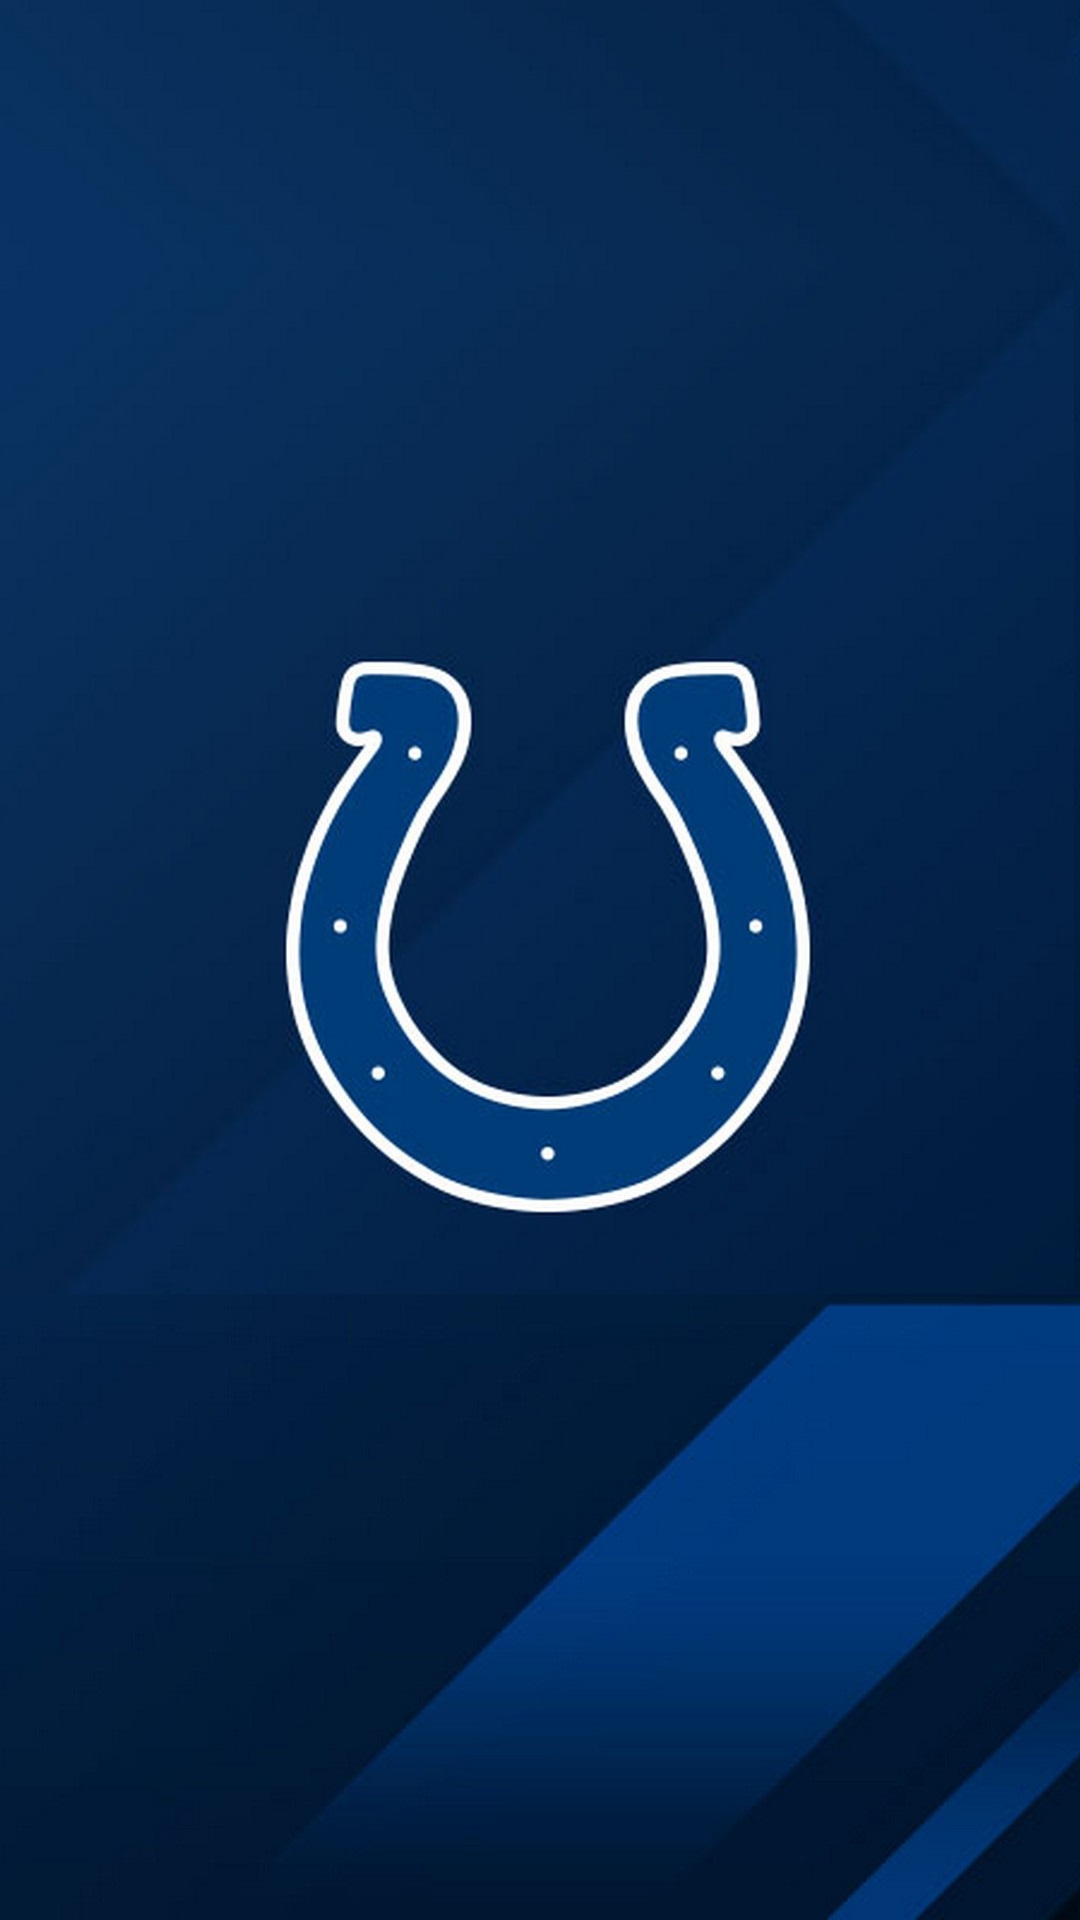 Indianapolis Colts NFL iPhone Lock Screen Wallpaper with high-resolution 1080x1920 pixel. Donwload and set as wallpaper for your iPhone X, iPhone XS home screen backgrounds, XS Max, XR, iPhone8 lock screen wallpaper, iPhone 7, 6, SE and other mobile devices